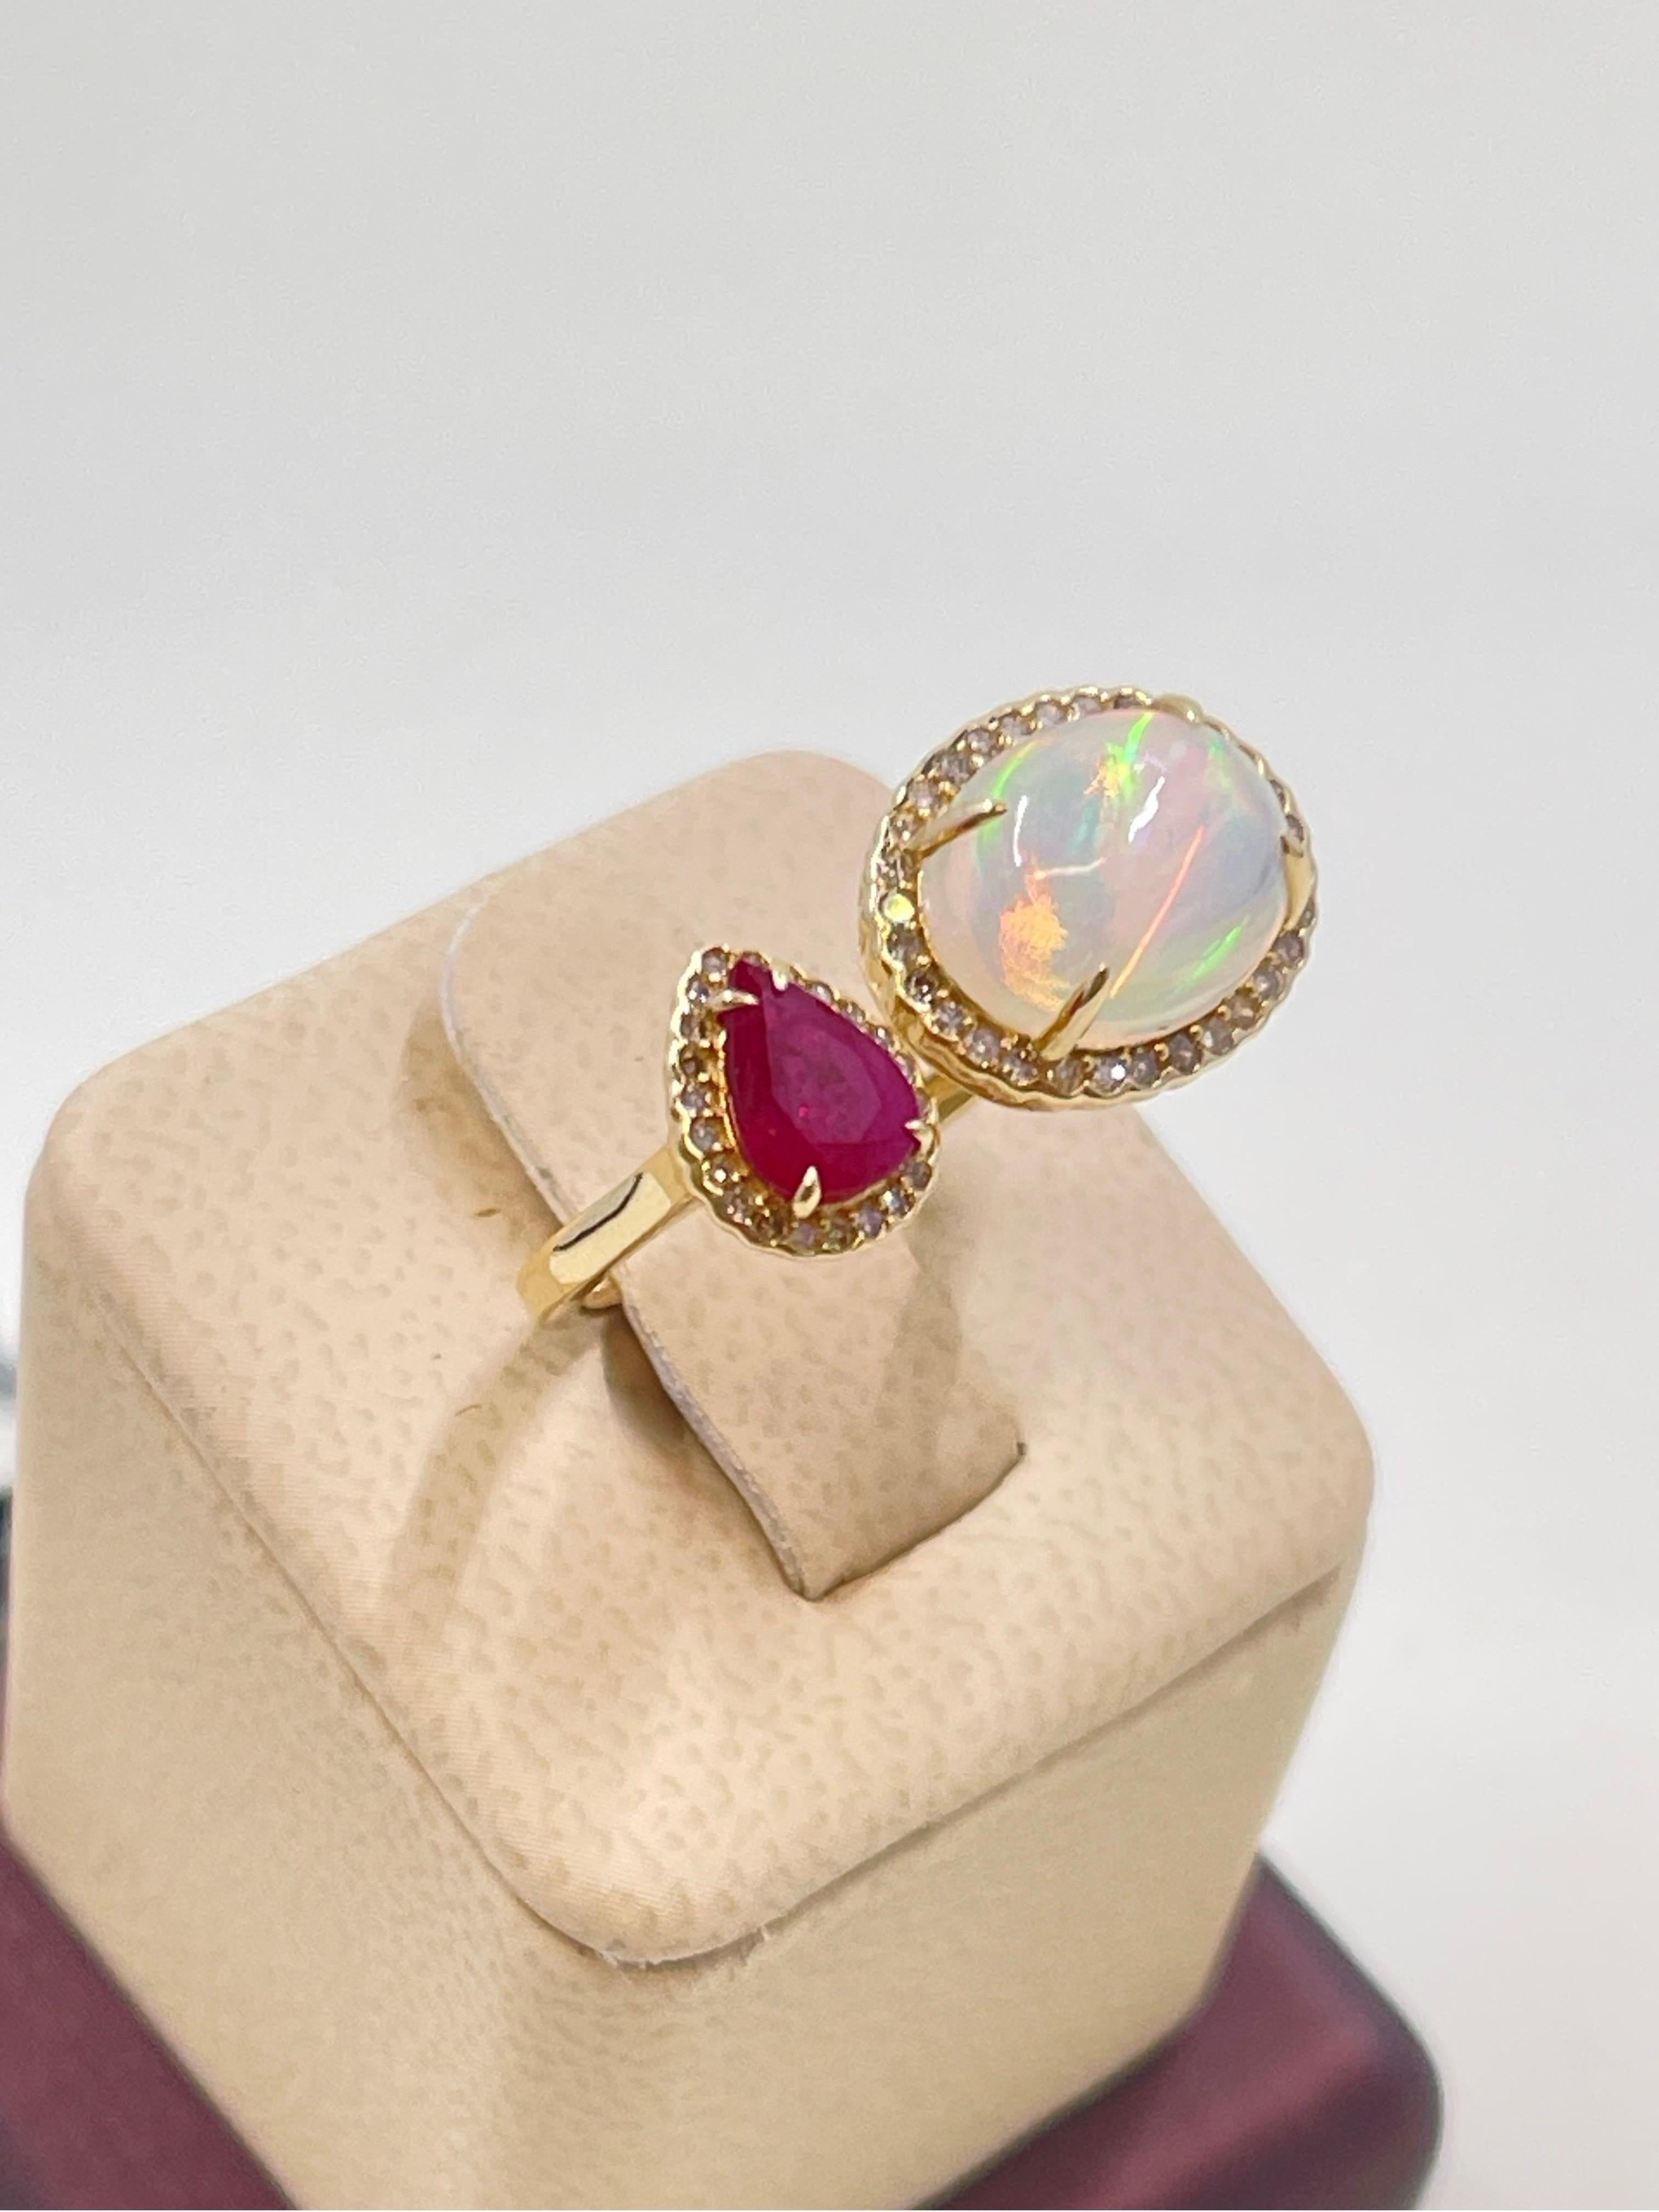 Breathtaking Fire Opal, Ruby & Diamond Ring In 14k yellow gold.

Opal 2.11 carats,

Ruby 0.68 carats,

Diamonds 0.246 carats

Gorgeous addition to your jewelry collection 💎